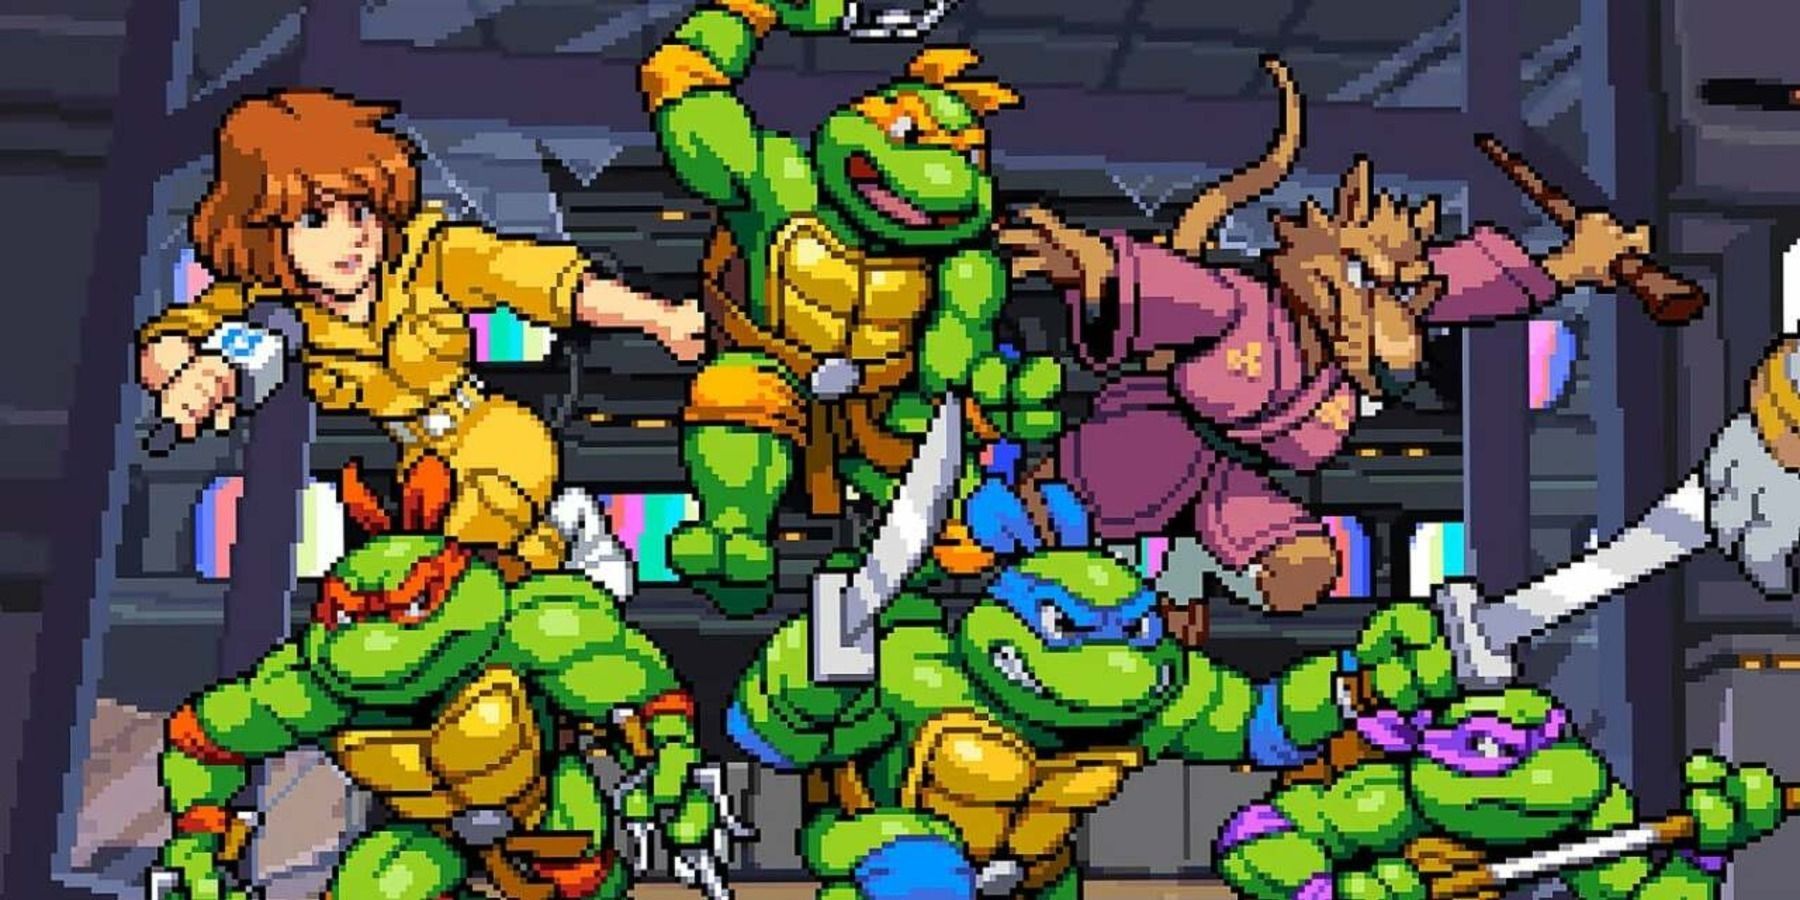 This Spider-Man mod shows us what the new TMNT should be like